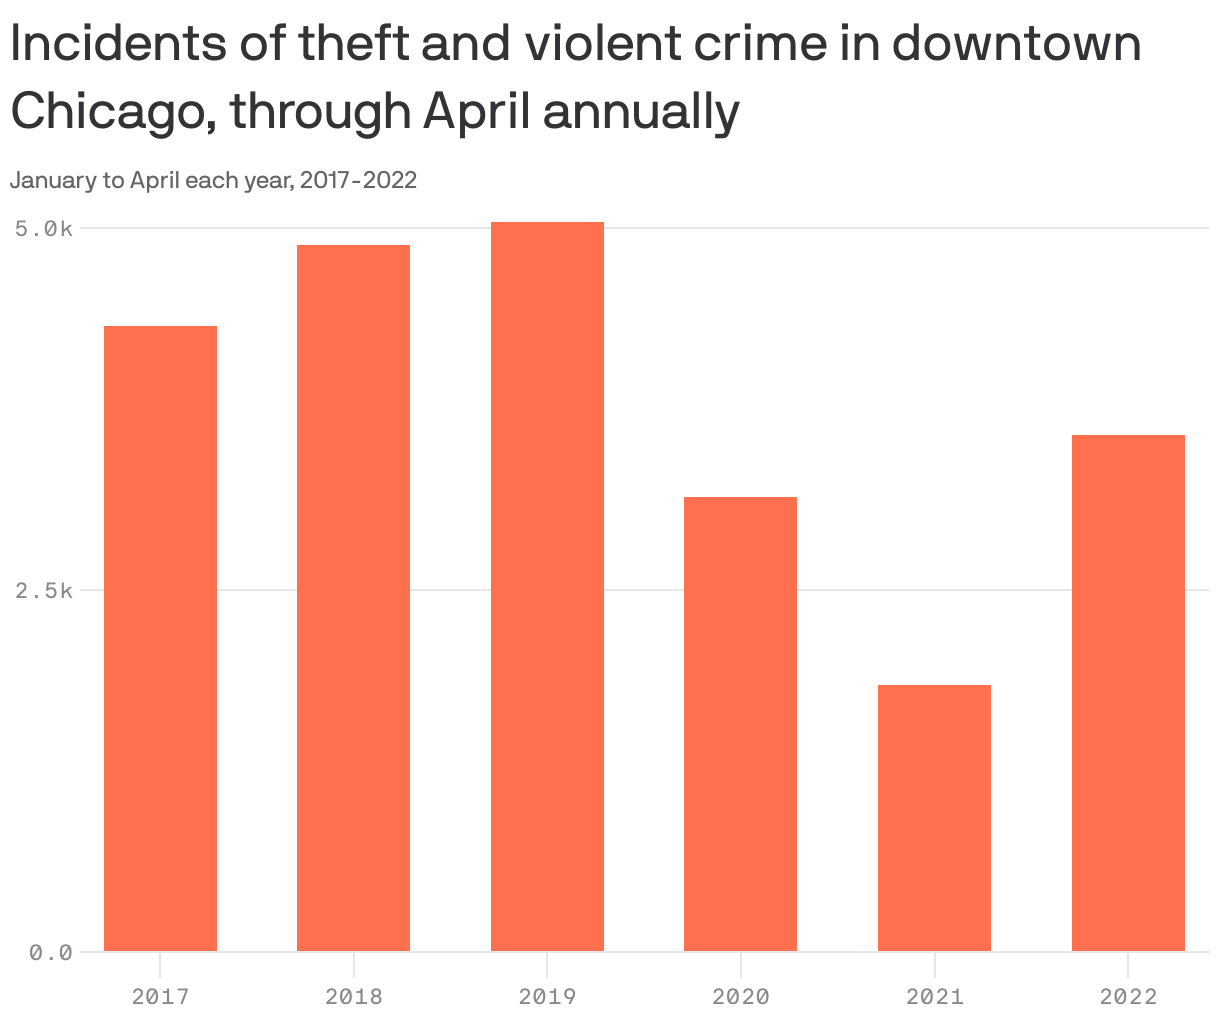 Incidents of theft and violent crime in downtown Chicago, through April annually